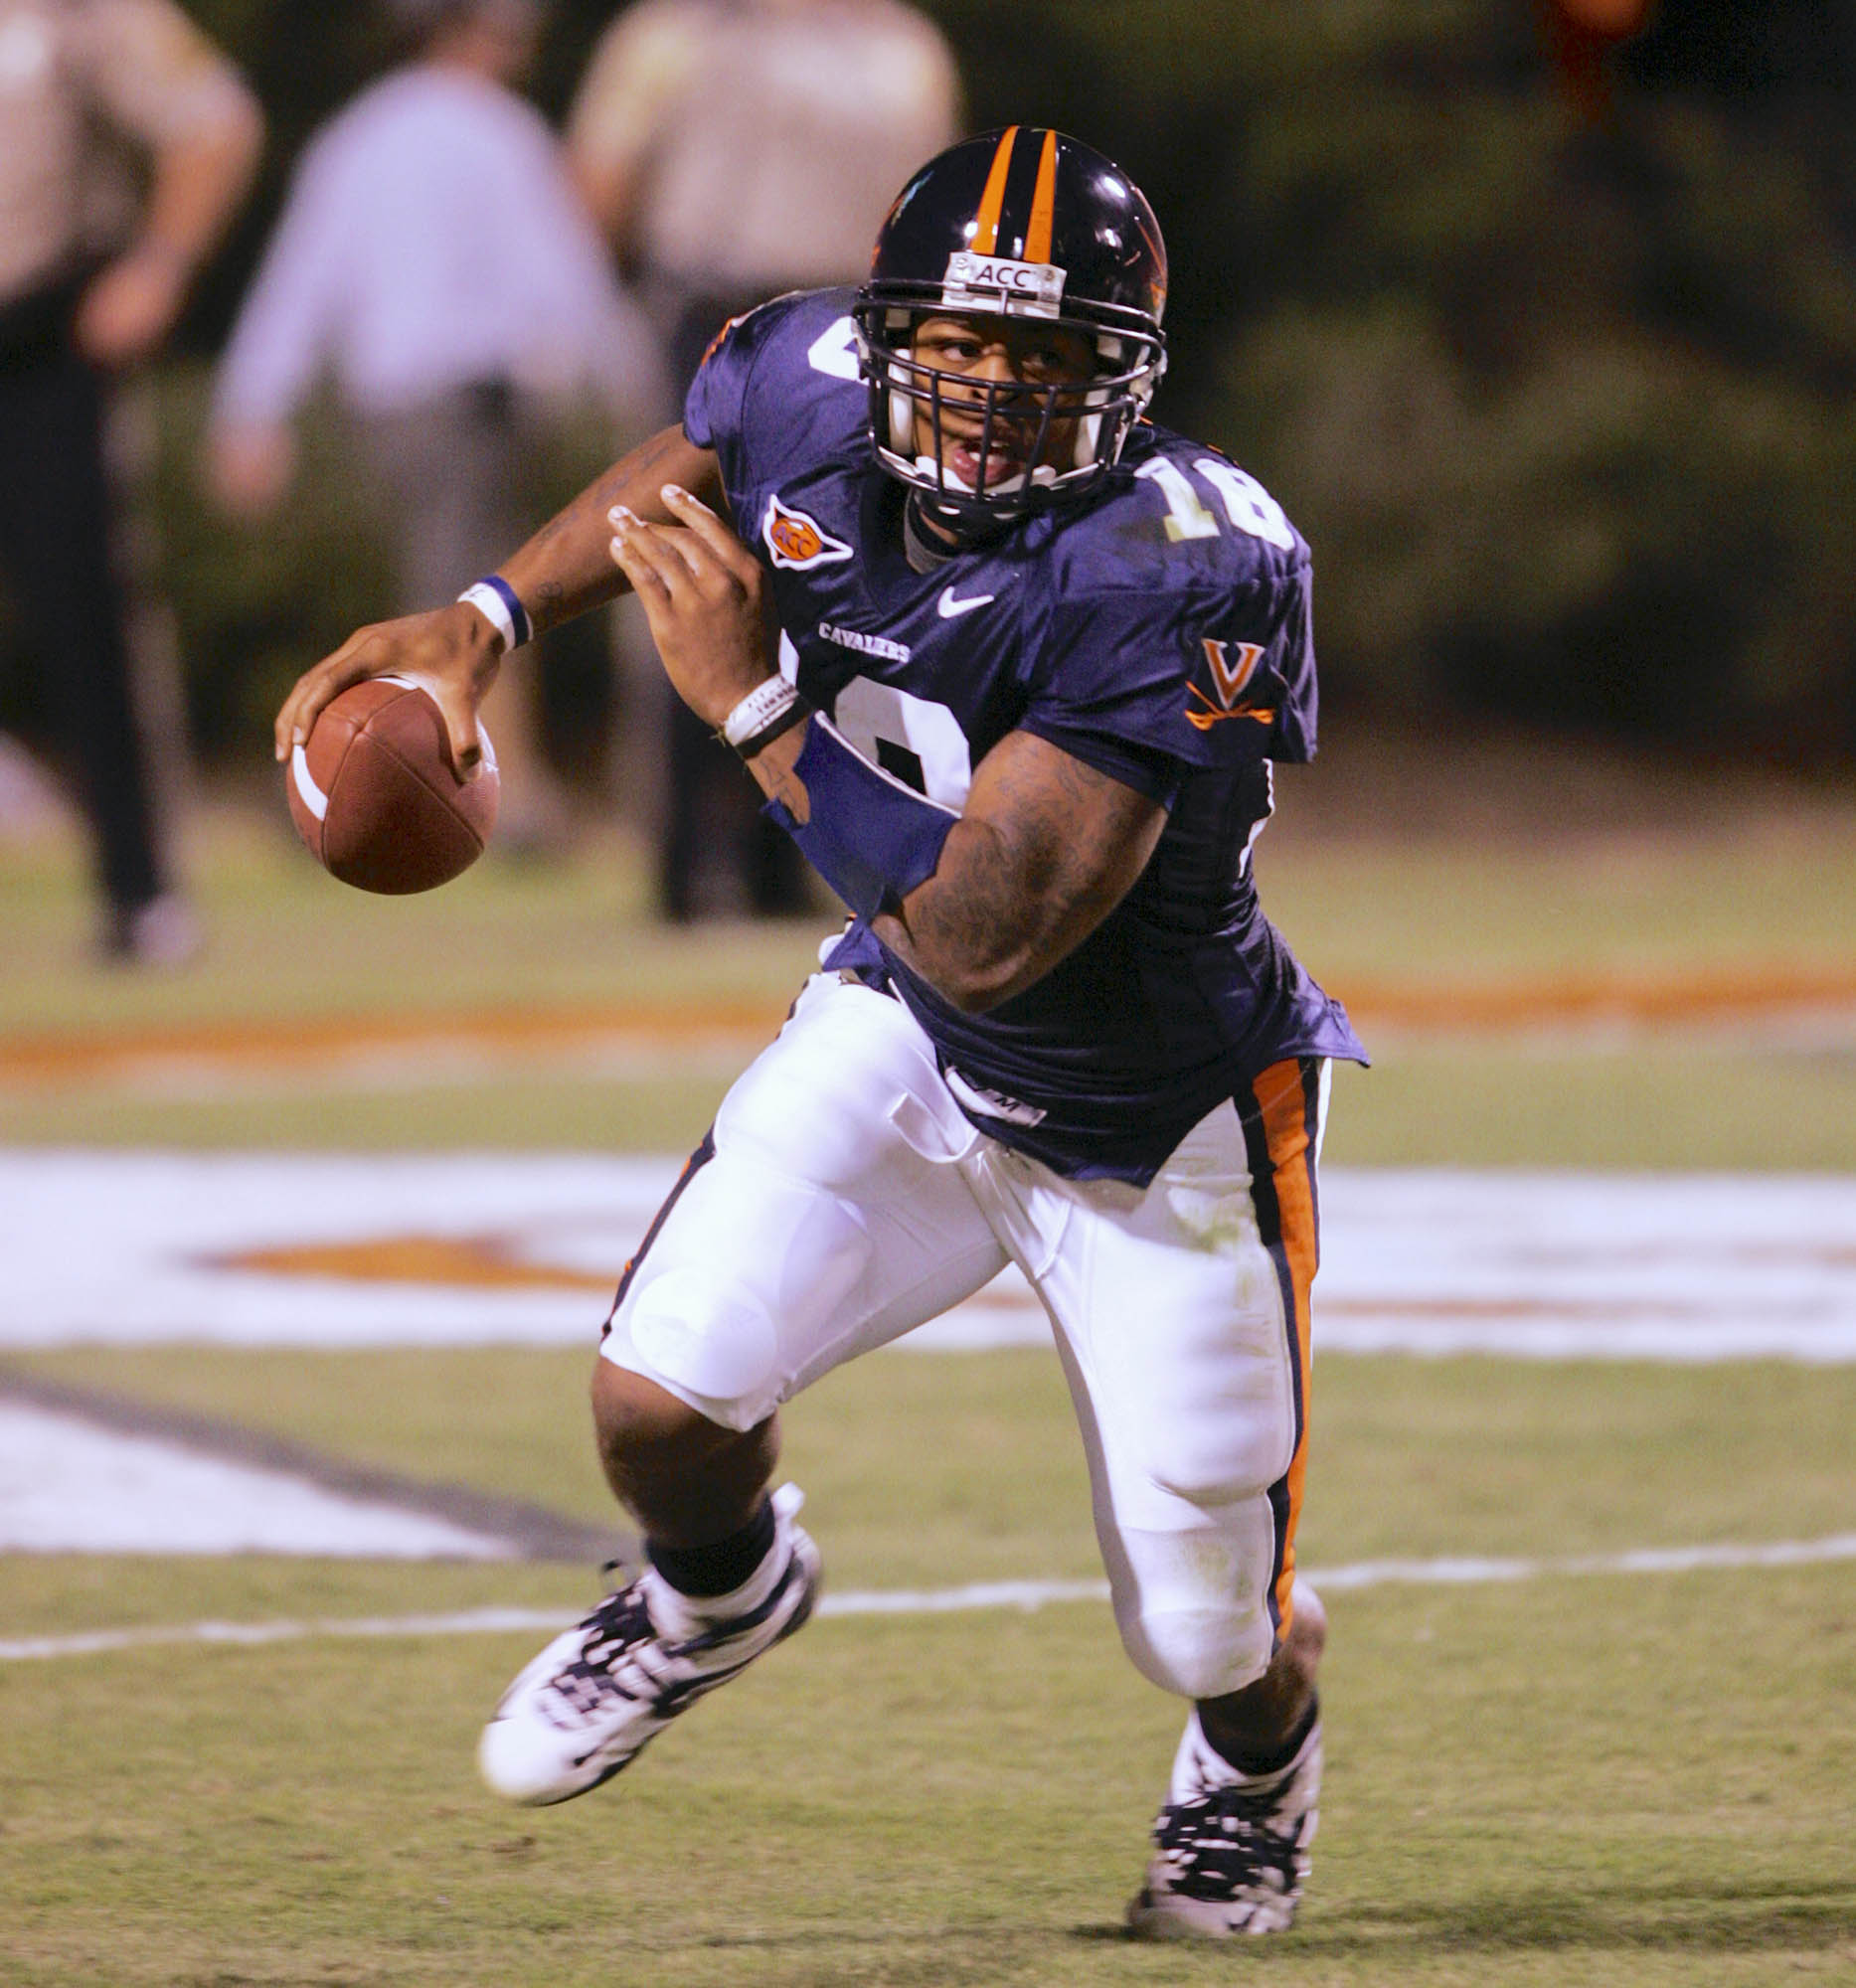 Marques Hagans running with the ball during a game